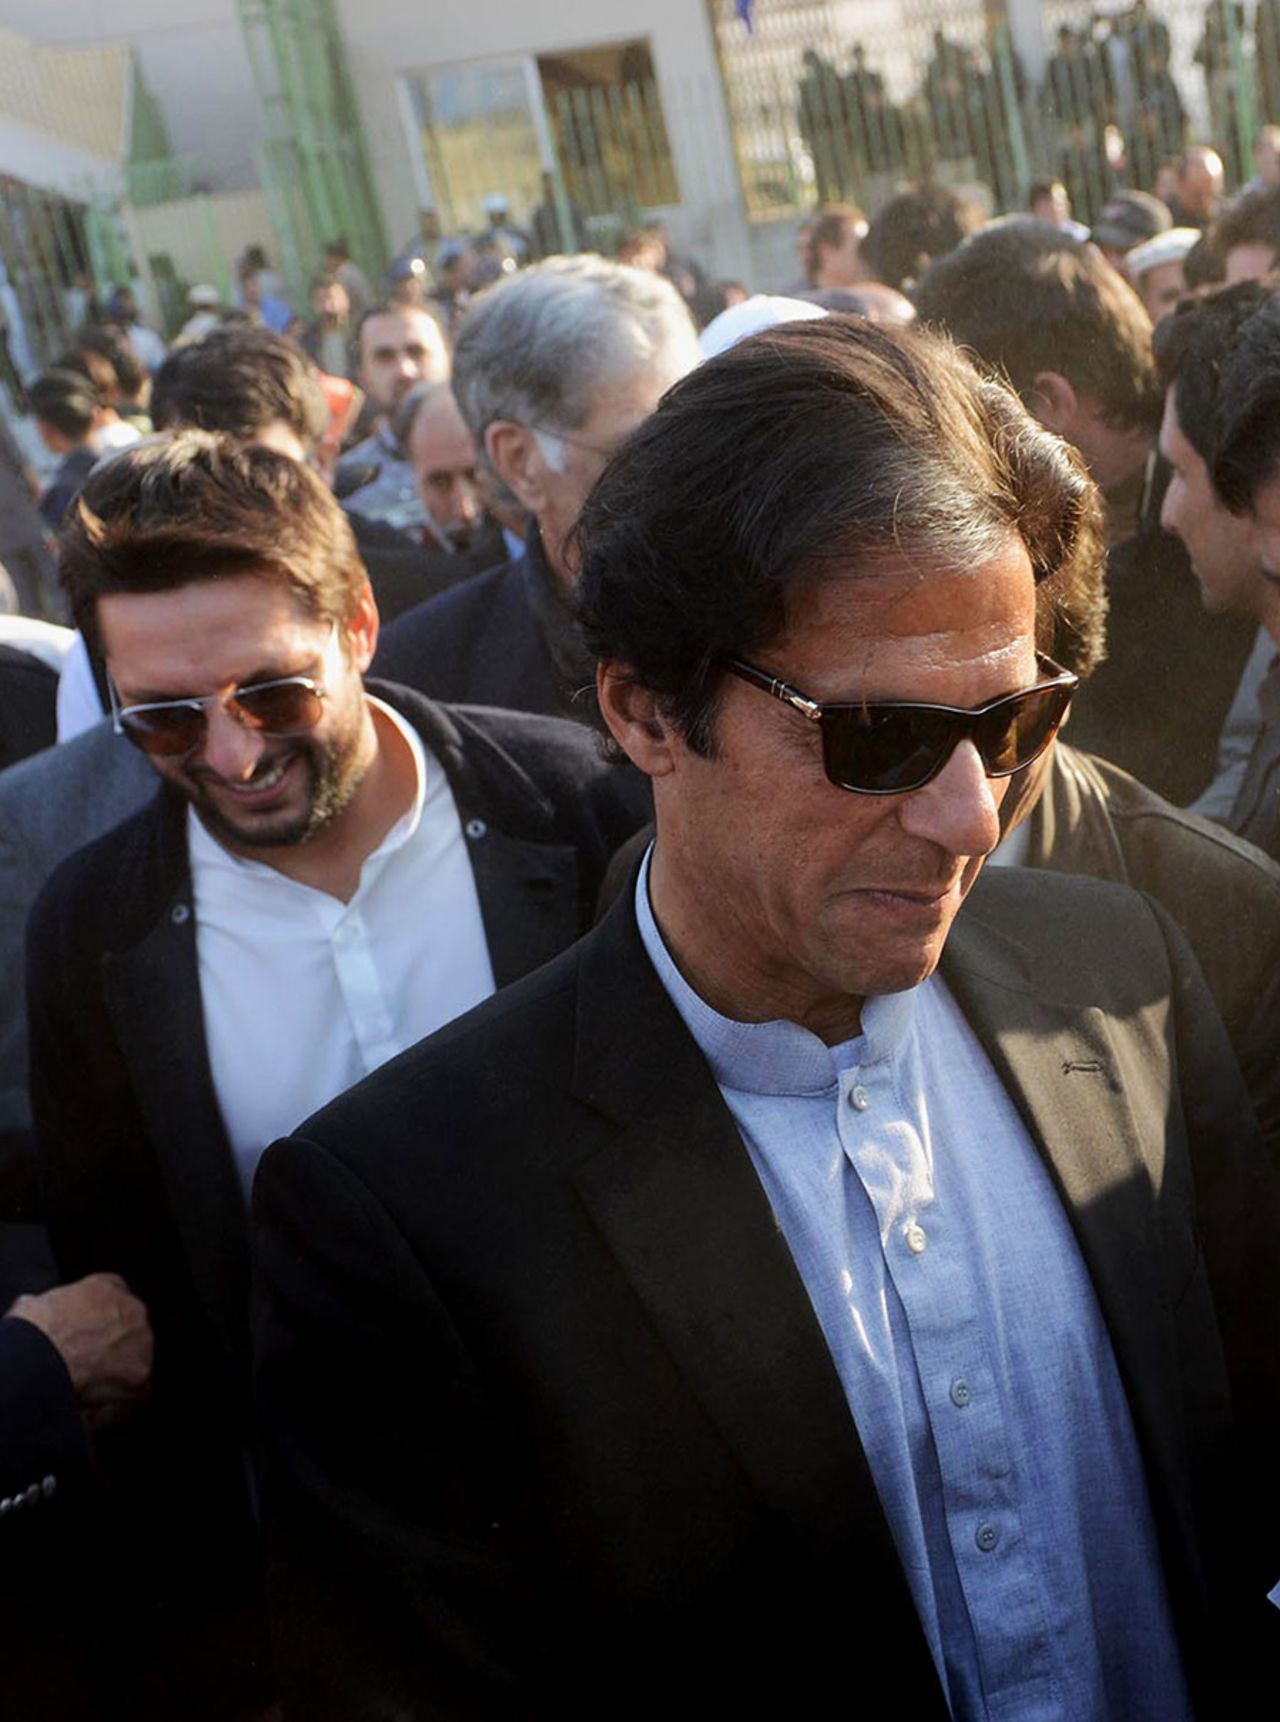 Imran Khan and Shahid Afridi arrive at the launch of a cricket talent hunt, Peshawar, January 25, 2014